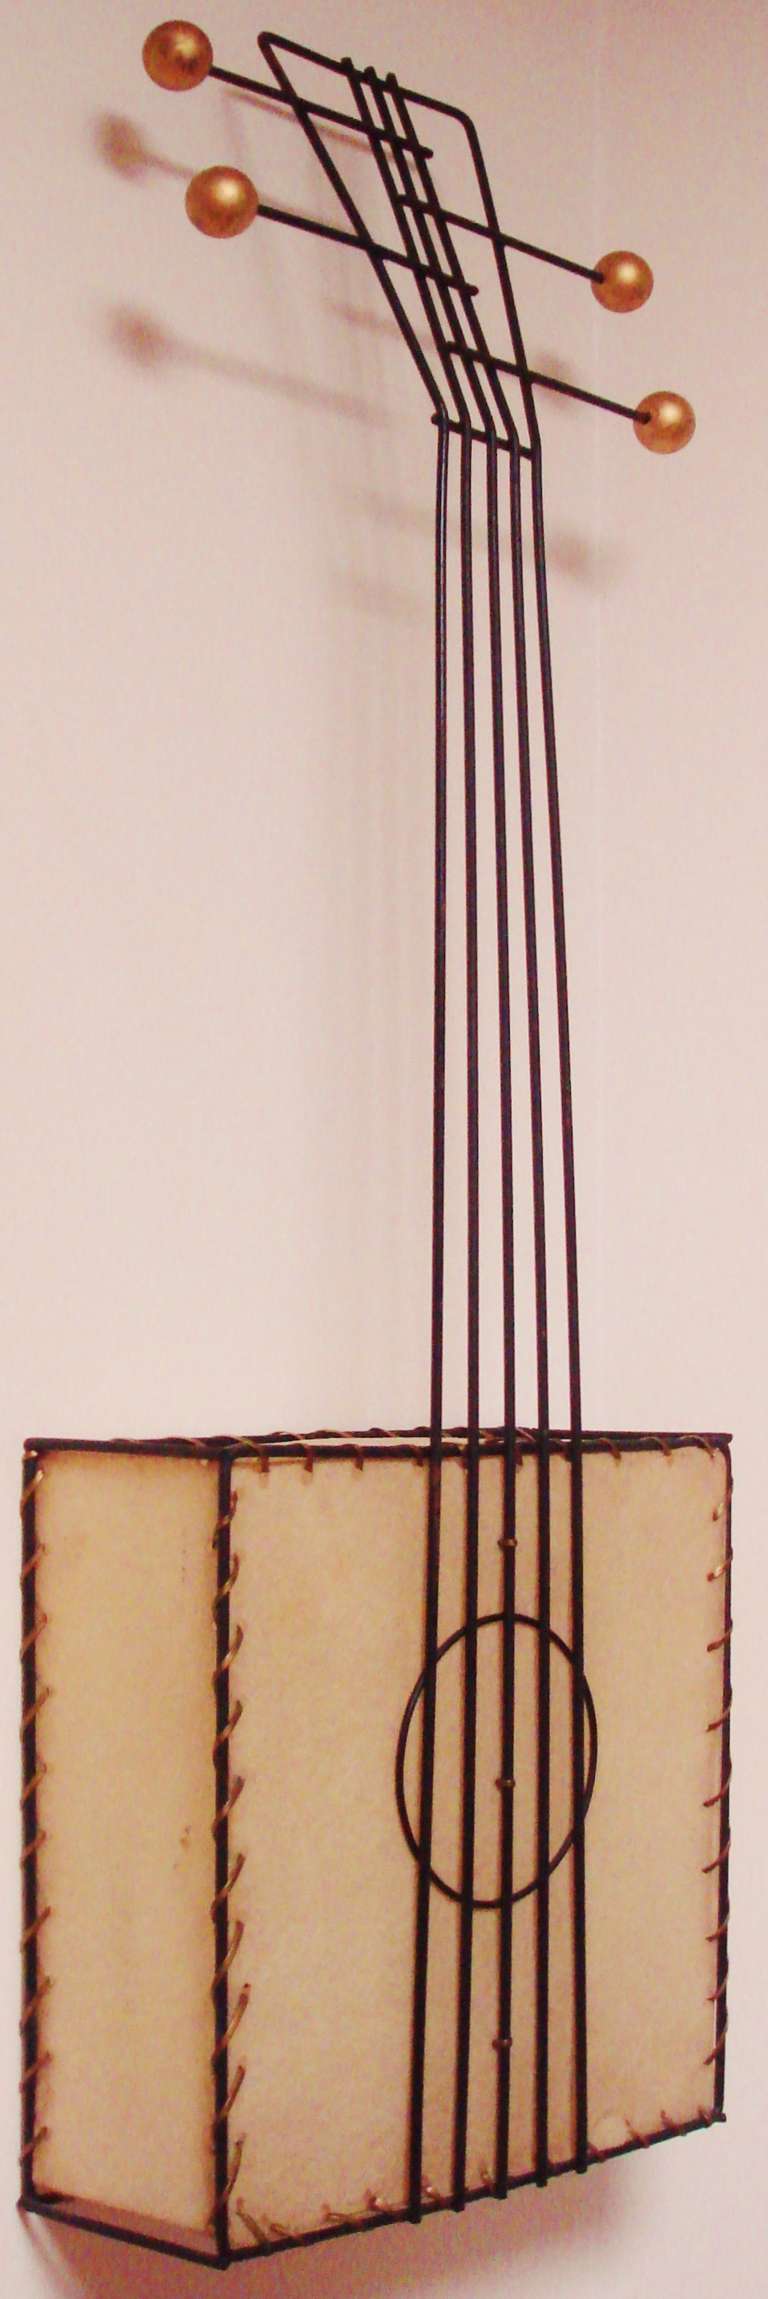 This iconic American Mid-Century Modern figural square guitar wall lamp by Frederick Weinberg is one of a series of 5-stringed instrument lamps that he created for his interior accents company, The Frederick Weinberg Company of Philadelphia. This